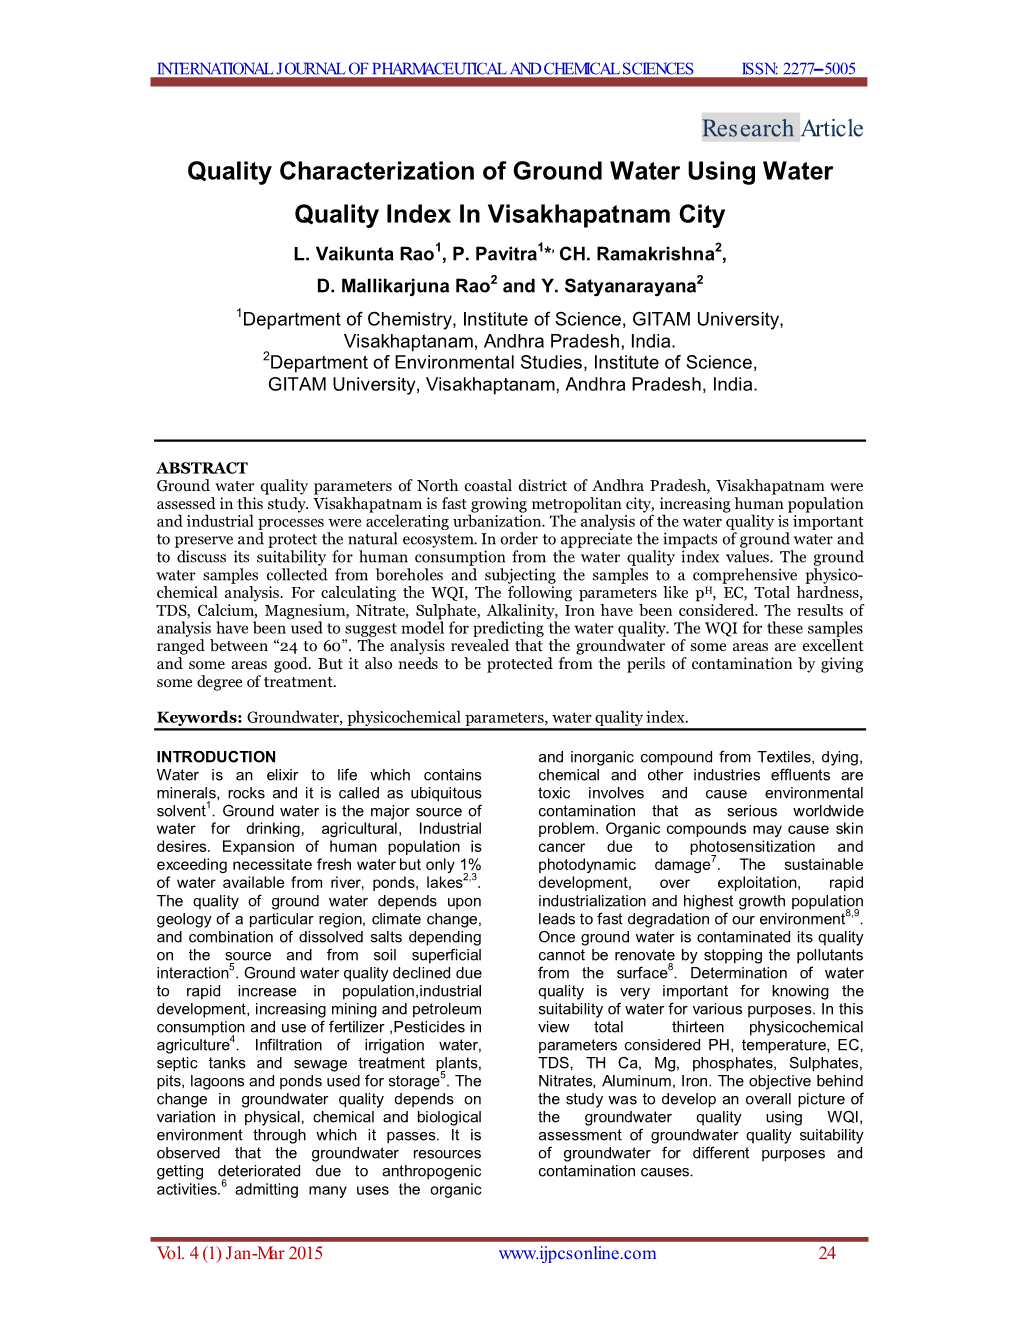 Research Article Quality Characterization of Ground Water Using Water Quality Index in Visakhapatnam City L